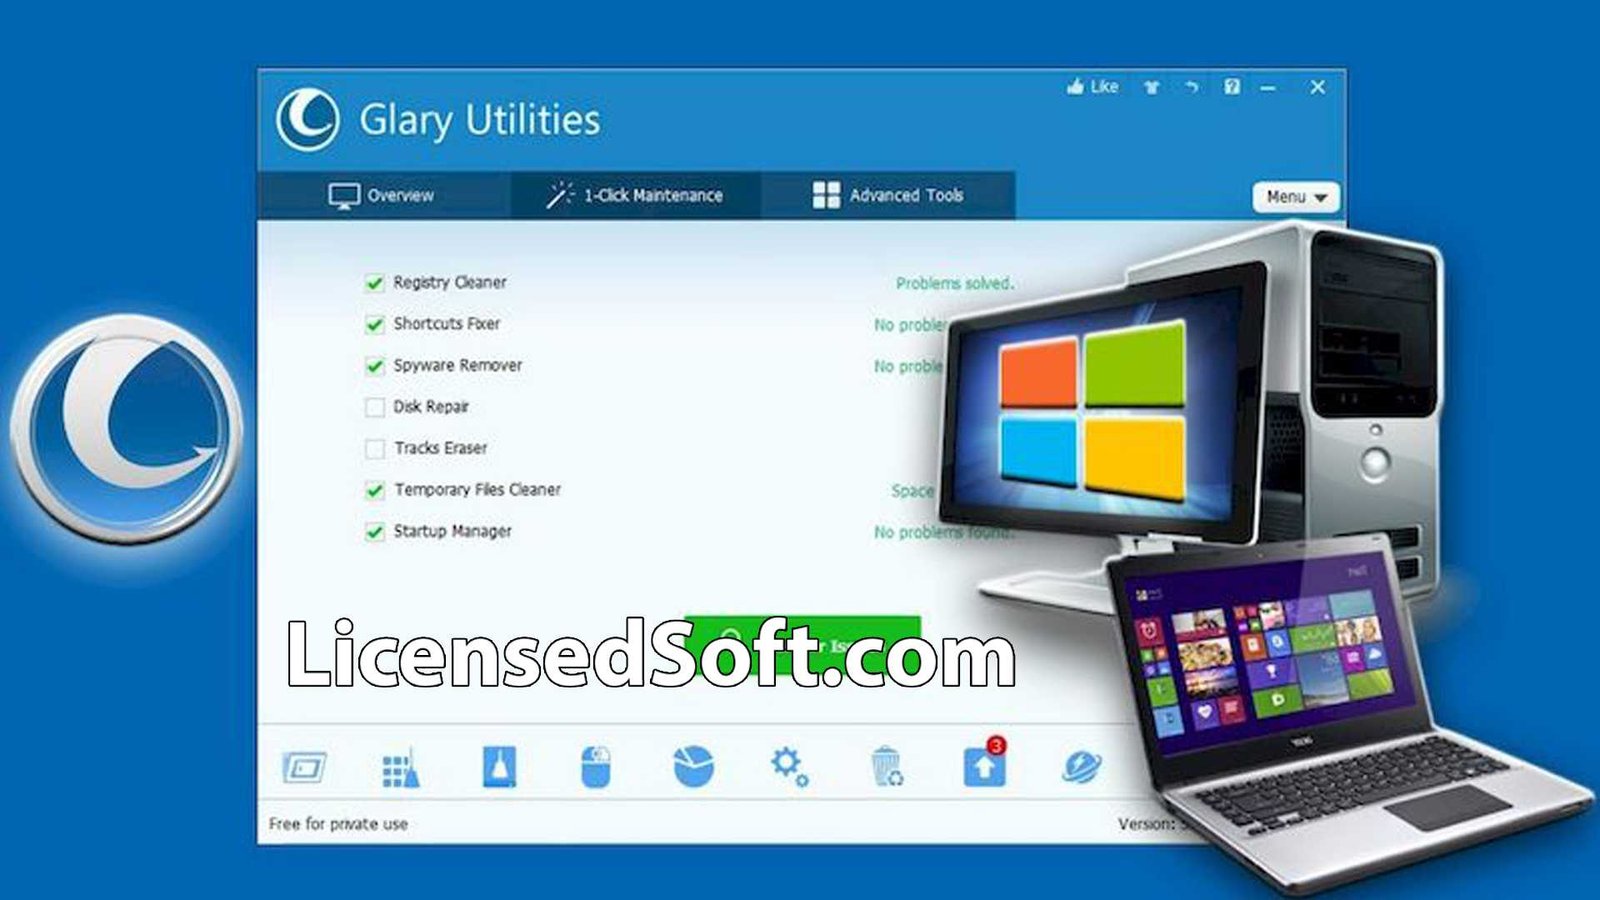 Glary Utilities Pro 5.210.0.239 Cover Image By LicensedSoft